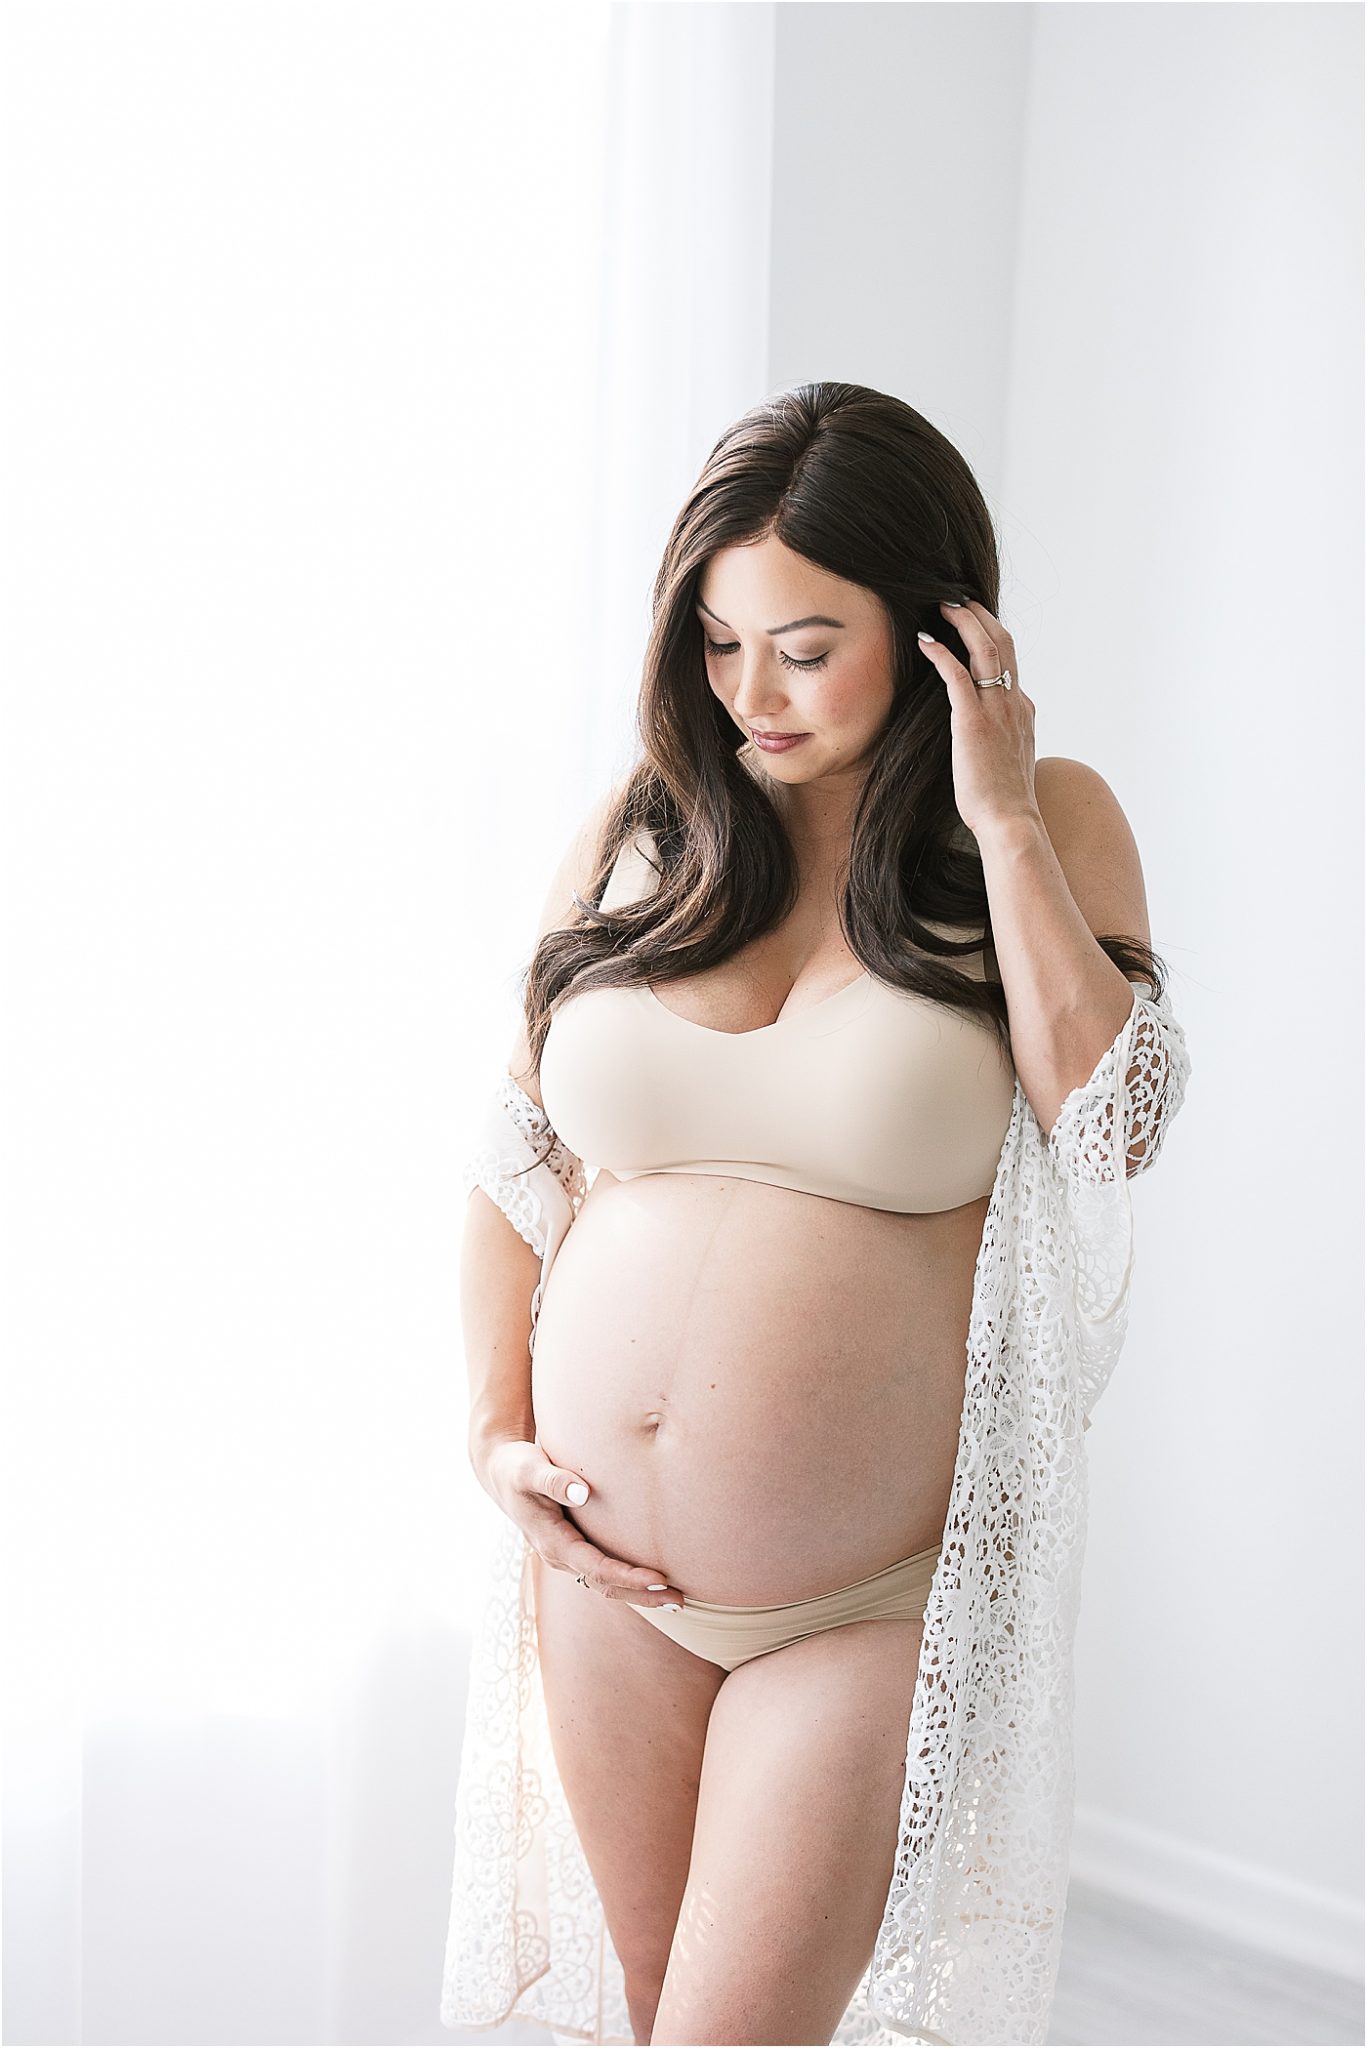 Intimate maternity session in studio in Fishers Indiana. Photo by Lindsay Konopa Photography.